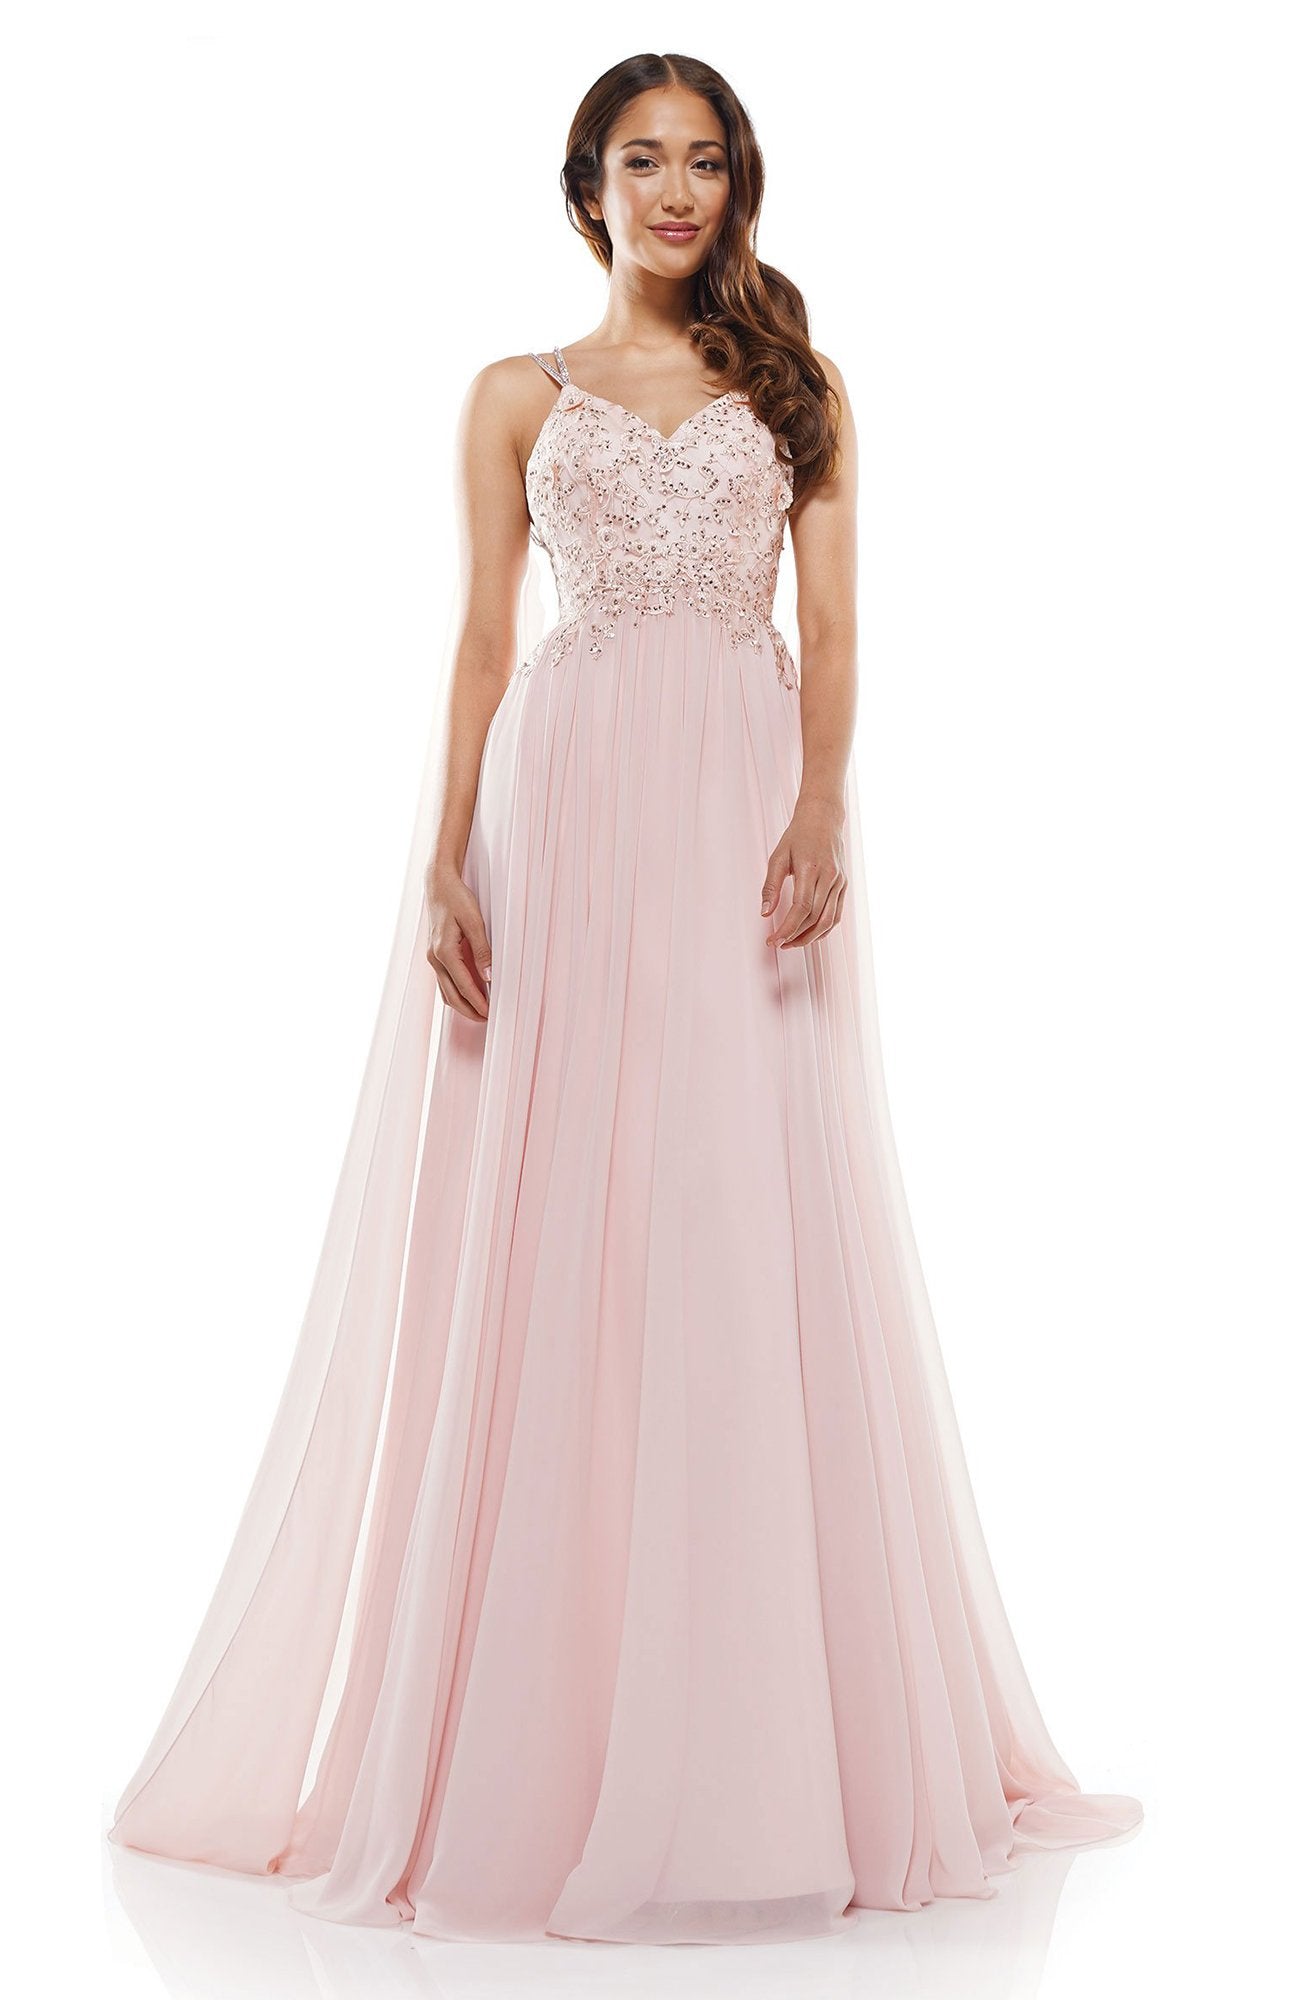 Glow Dress - G927 Beaded Lace Chiffon A-Line Gown with Long Drape Cape In Pink